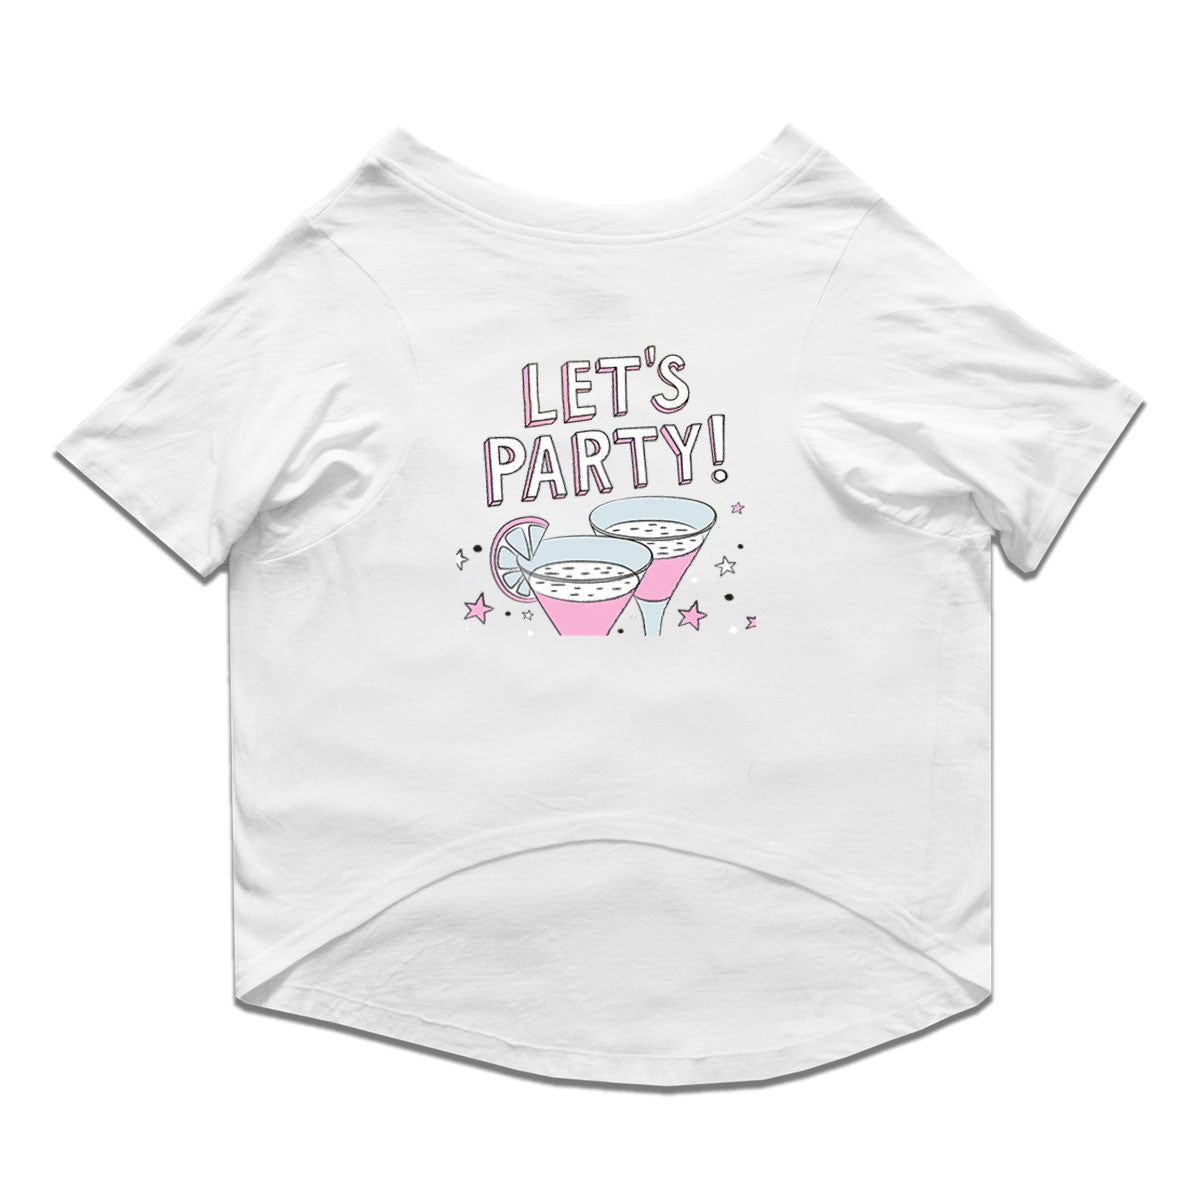 Ruse / White Ruse Basic Crew Neck "Let's Party" Printed Half Sleeves Dog Tee16